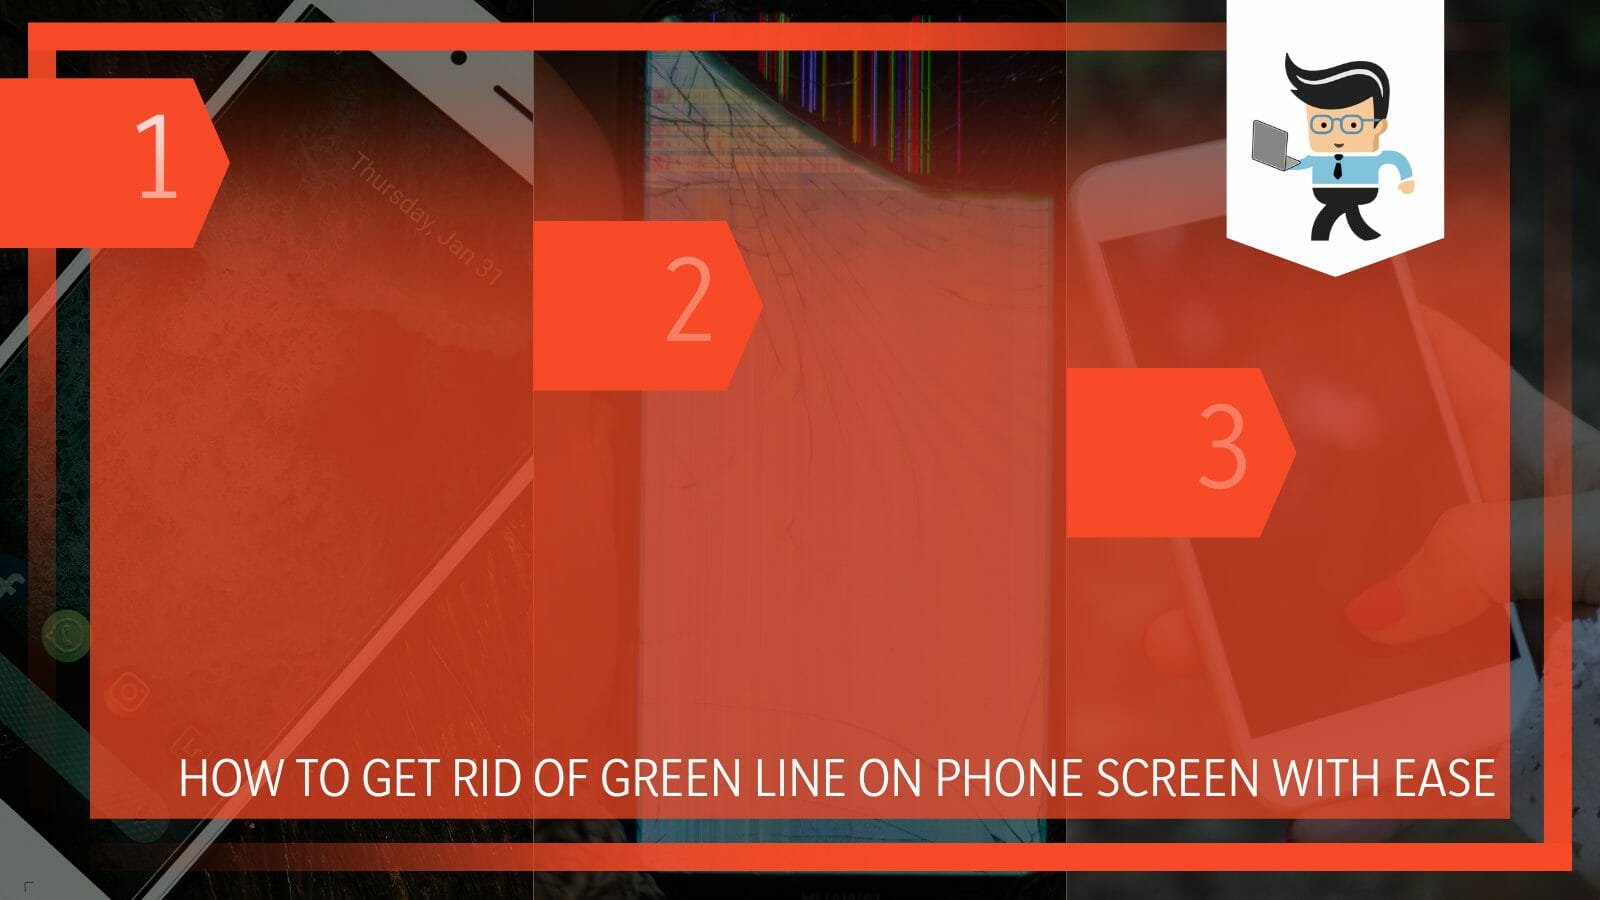 Get Rid of Green Line on Phone Screen With Ease